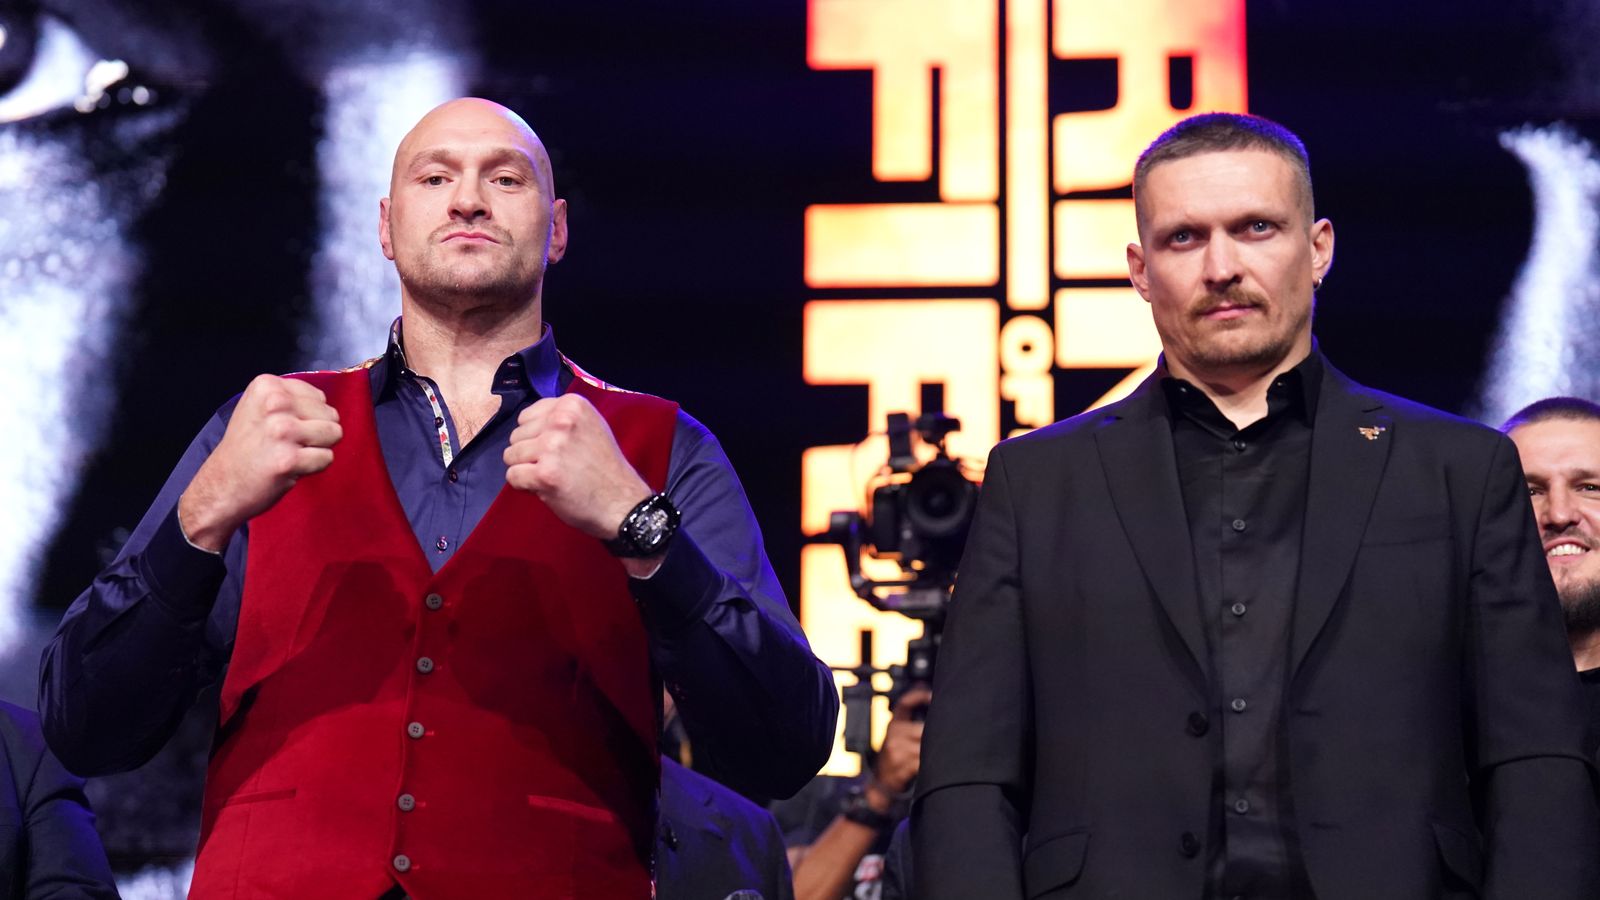 Fury vs Usyk: Live build-up, latest news and updates ahead of undisputed heavyweight title fight in Saudi Arabia | Boxing News